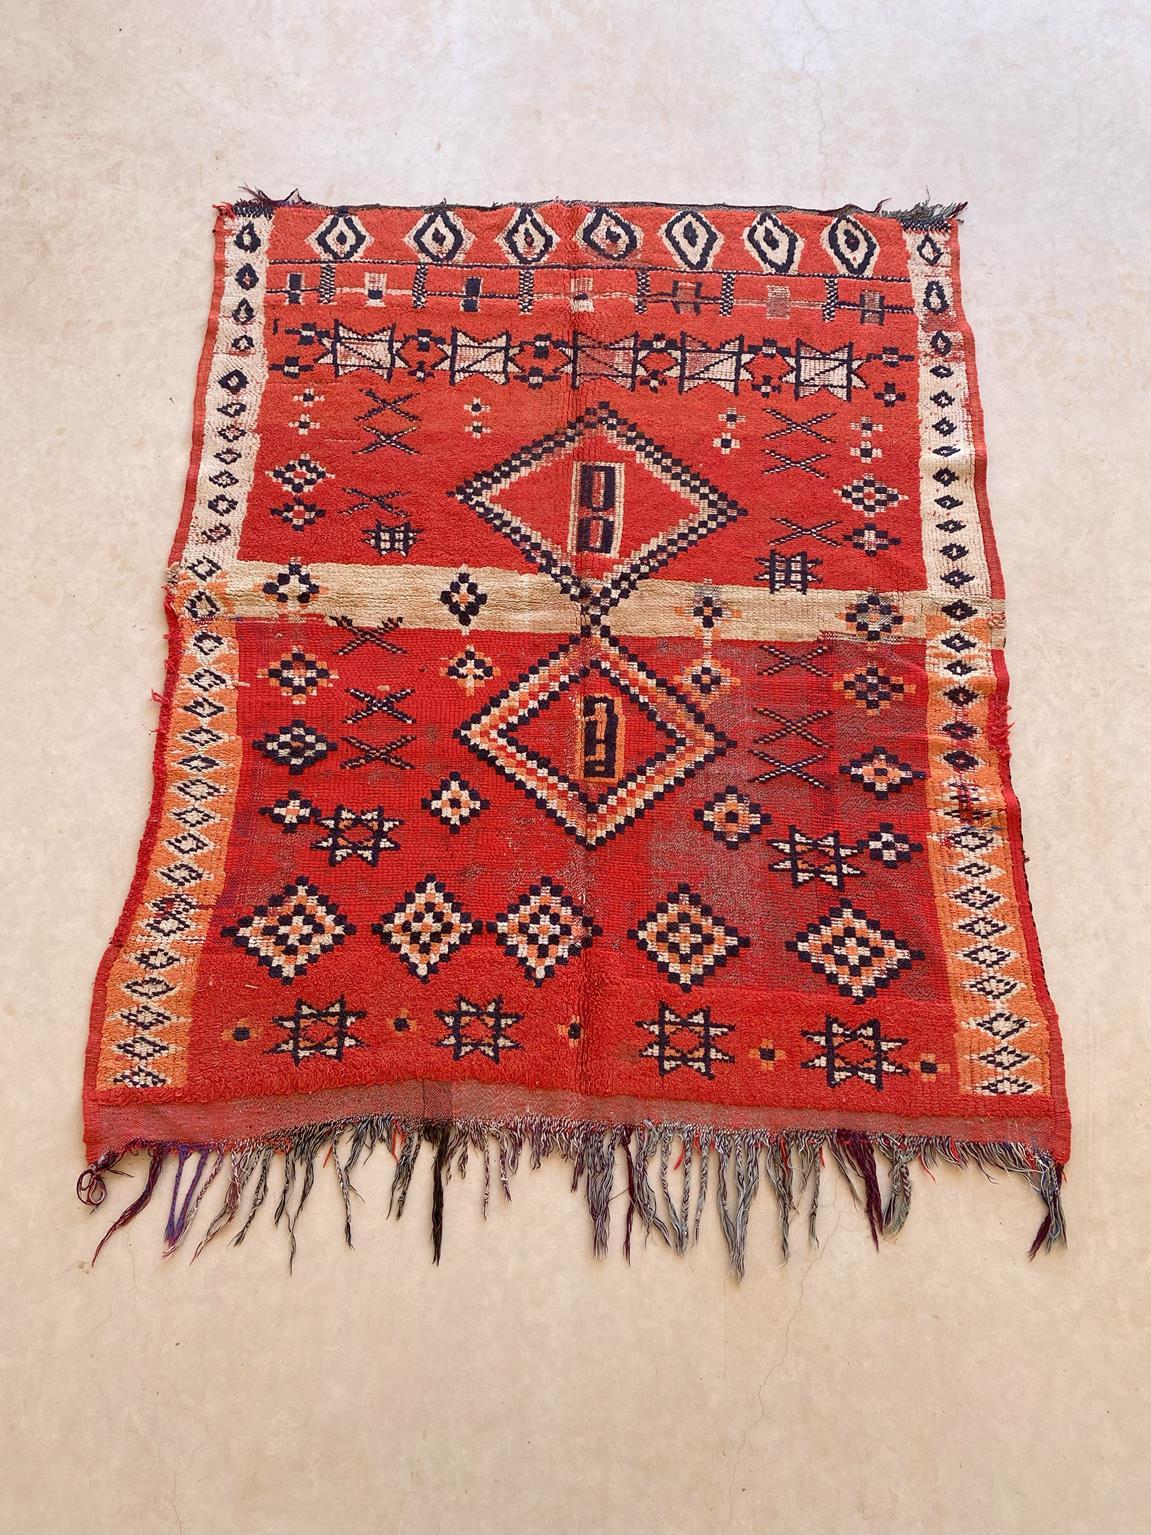 Vintage Moroccan Boujad rug - Red - 4x5feet / 124x153cm In Good Condition For Sale In Marrakech, MA